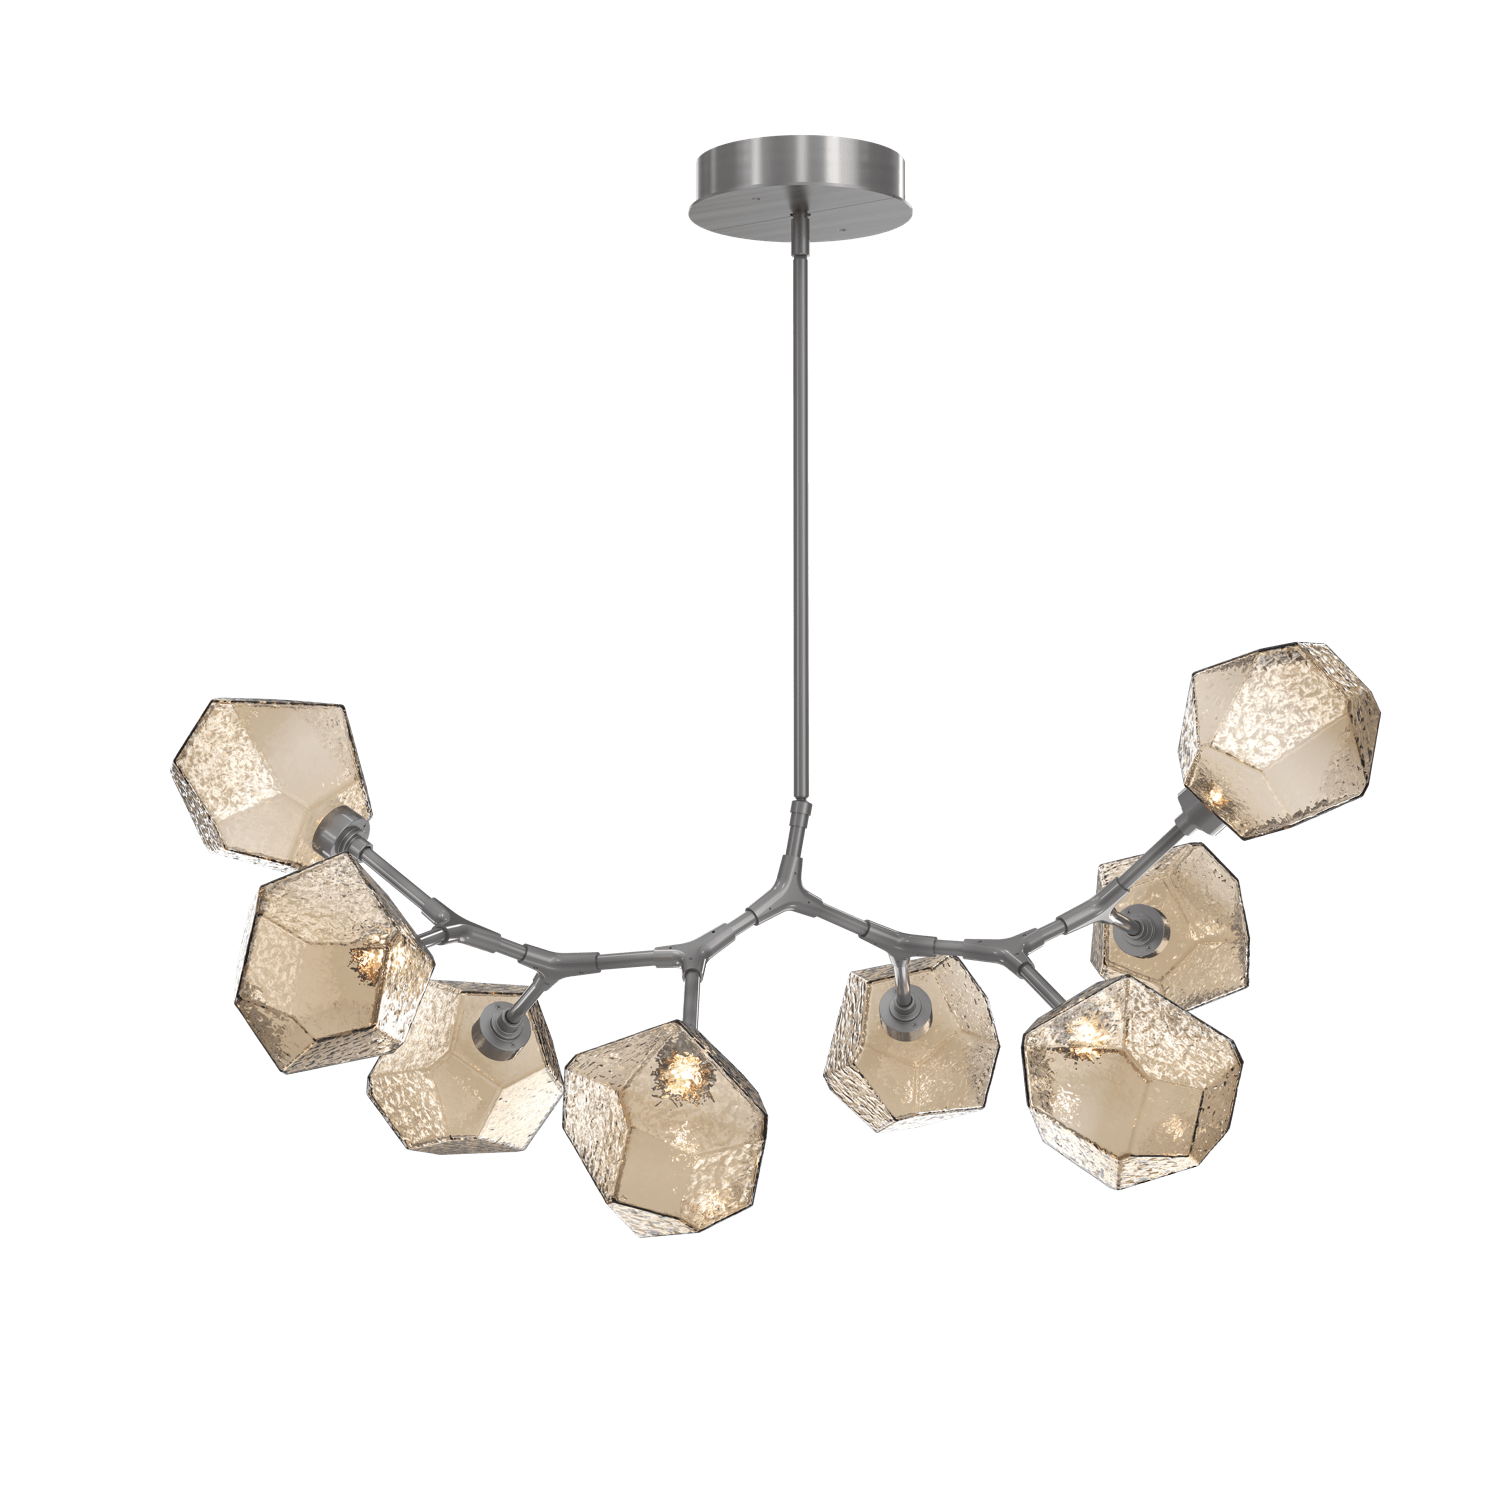 PLB0039-BB-SN-B-Hammerton-Studio-Gem-8-light-modern-branch-chandelier-with-satin-nickel-finish-and-bronze-blown-glass-shades-and-LED-lamping